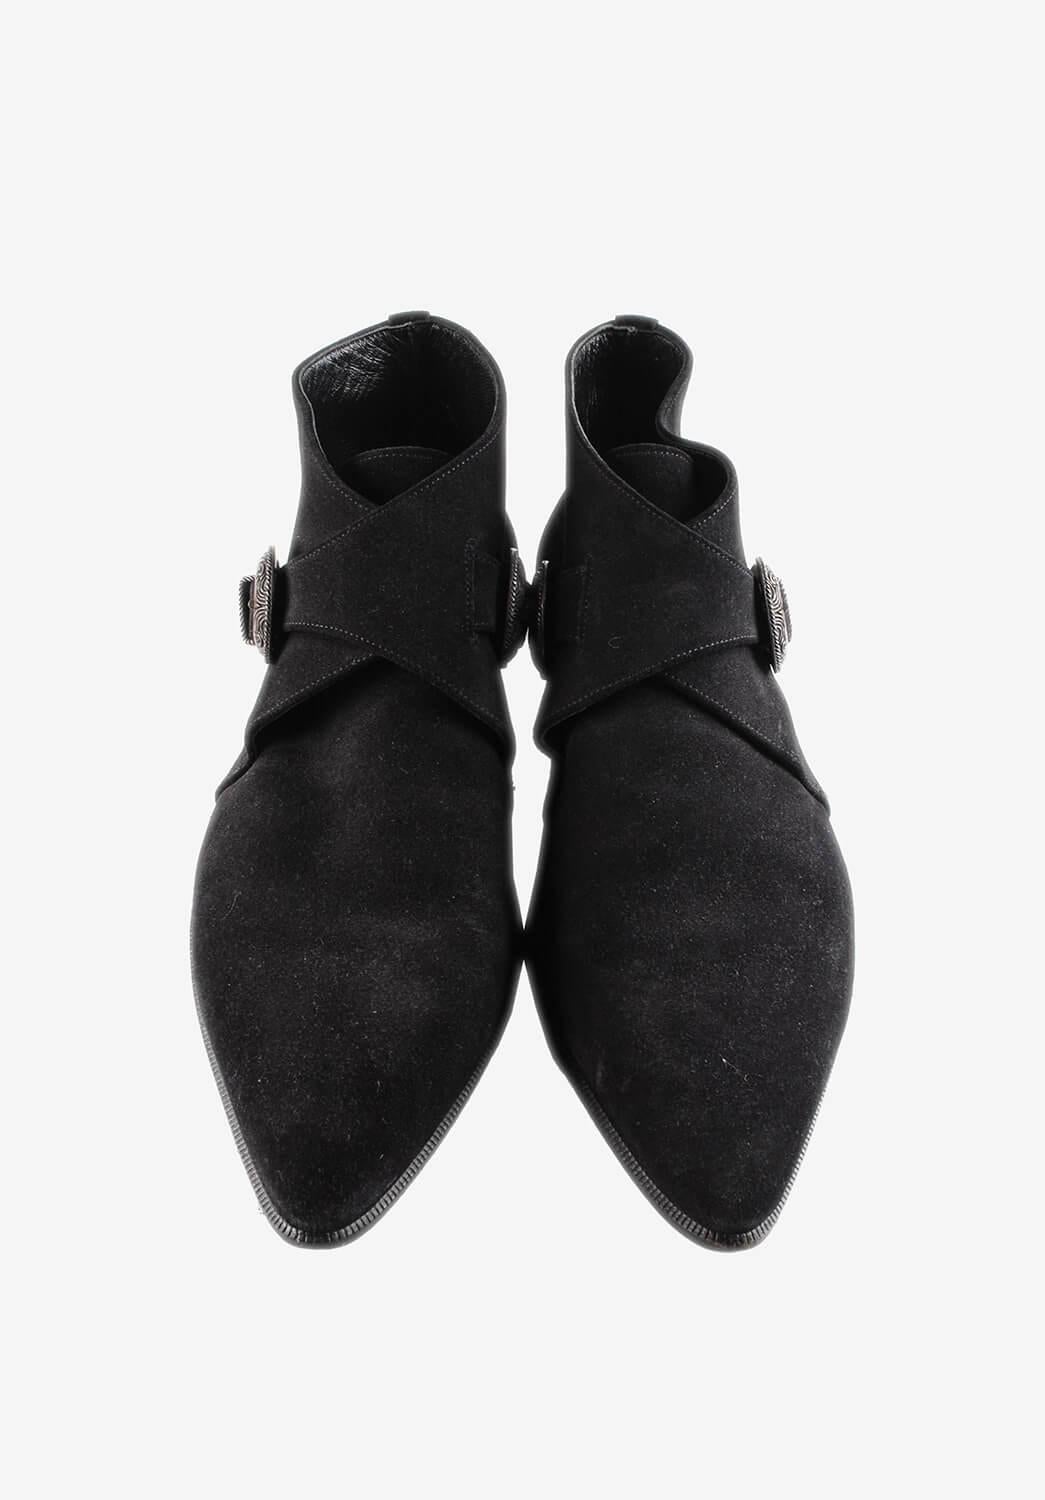 Item for sale is 100% genuine Saint Laurent Suede Leather Duckies
Color: Black
(An actual color may a bit vary due to individual computer screen interpretation)
Material: Suede
Tag size: 44EUR, USA10, UK 9 1/2
These shoes are great quality item.